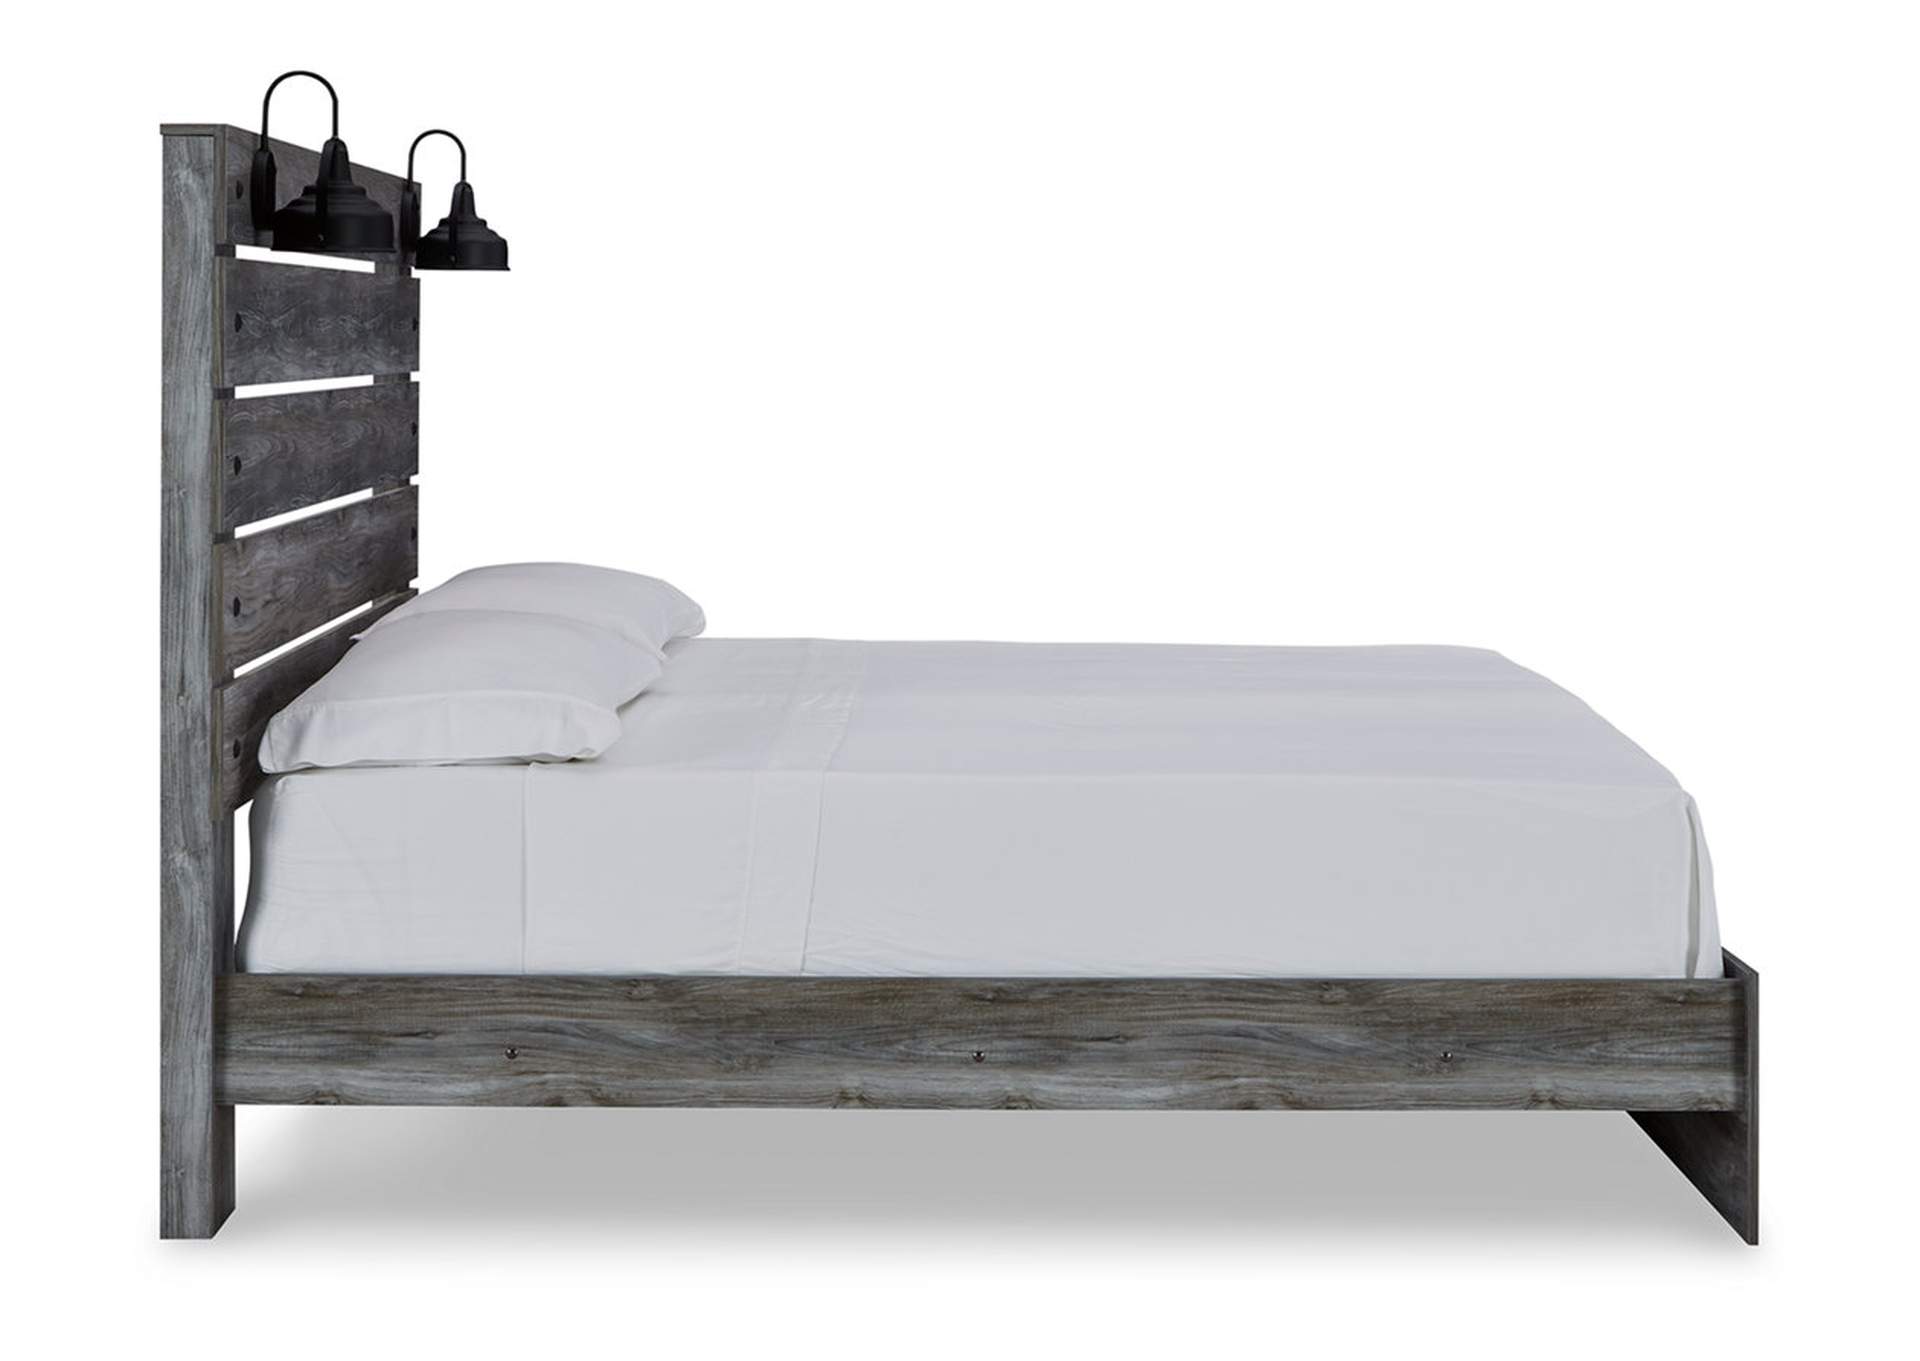 Baystorm King Panel Bed,Signature Design By Ashley